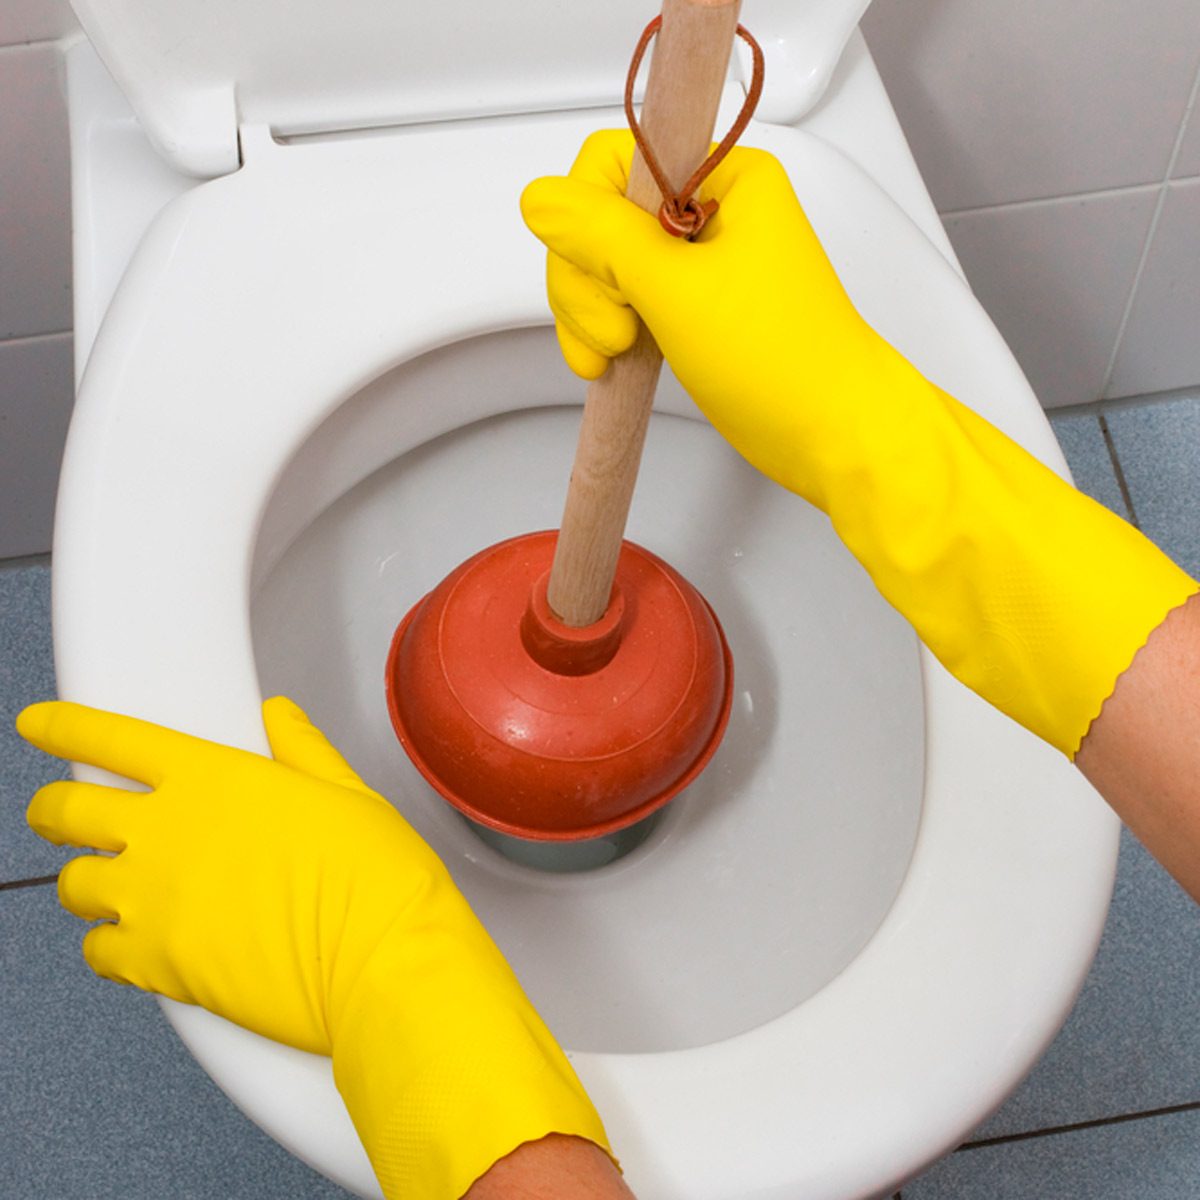 Here's How to Correctly Use a Toilet Plunger